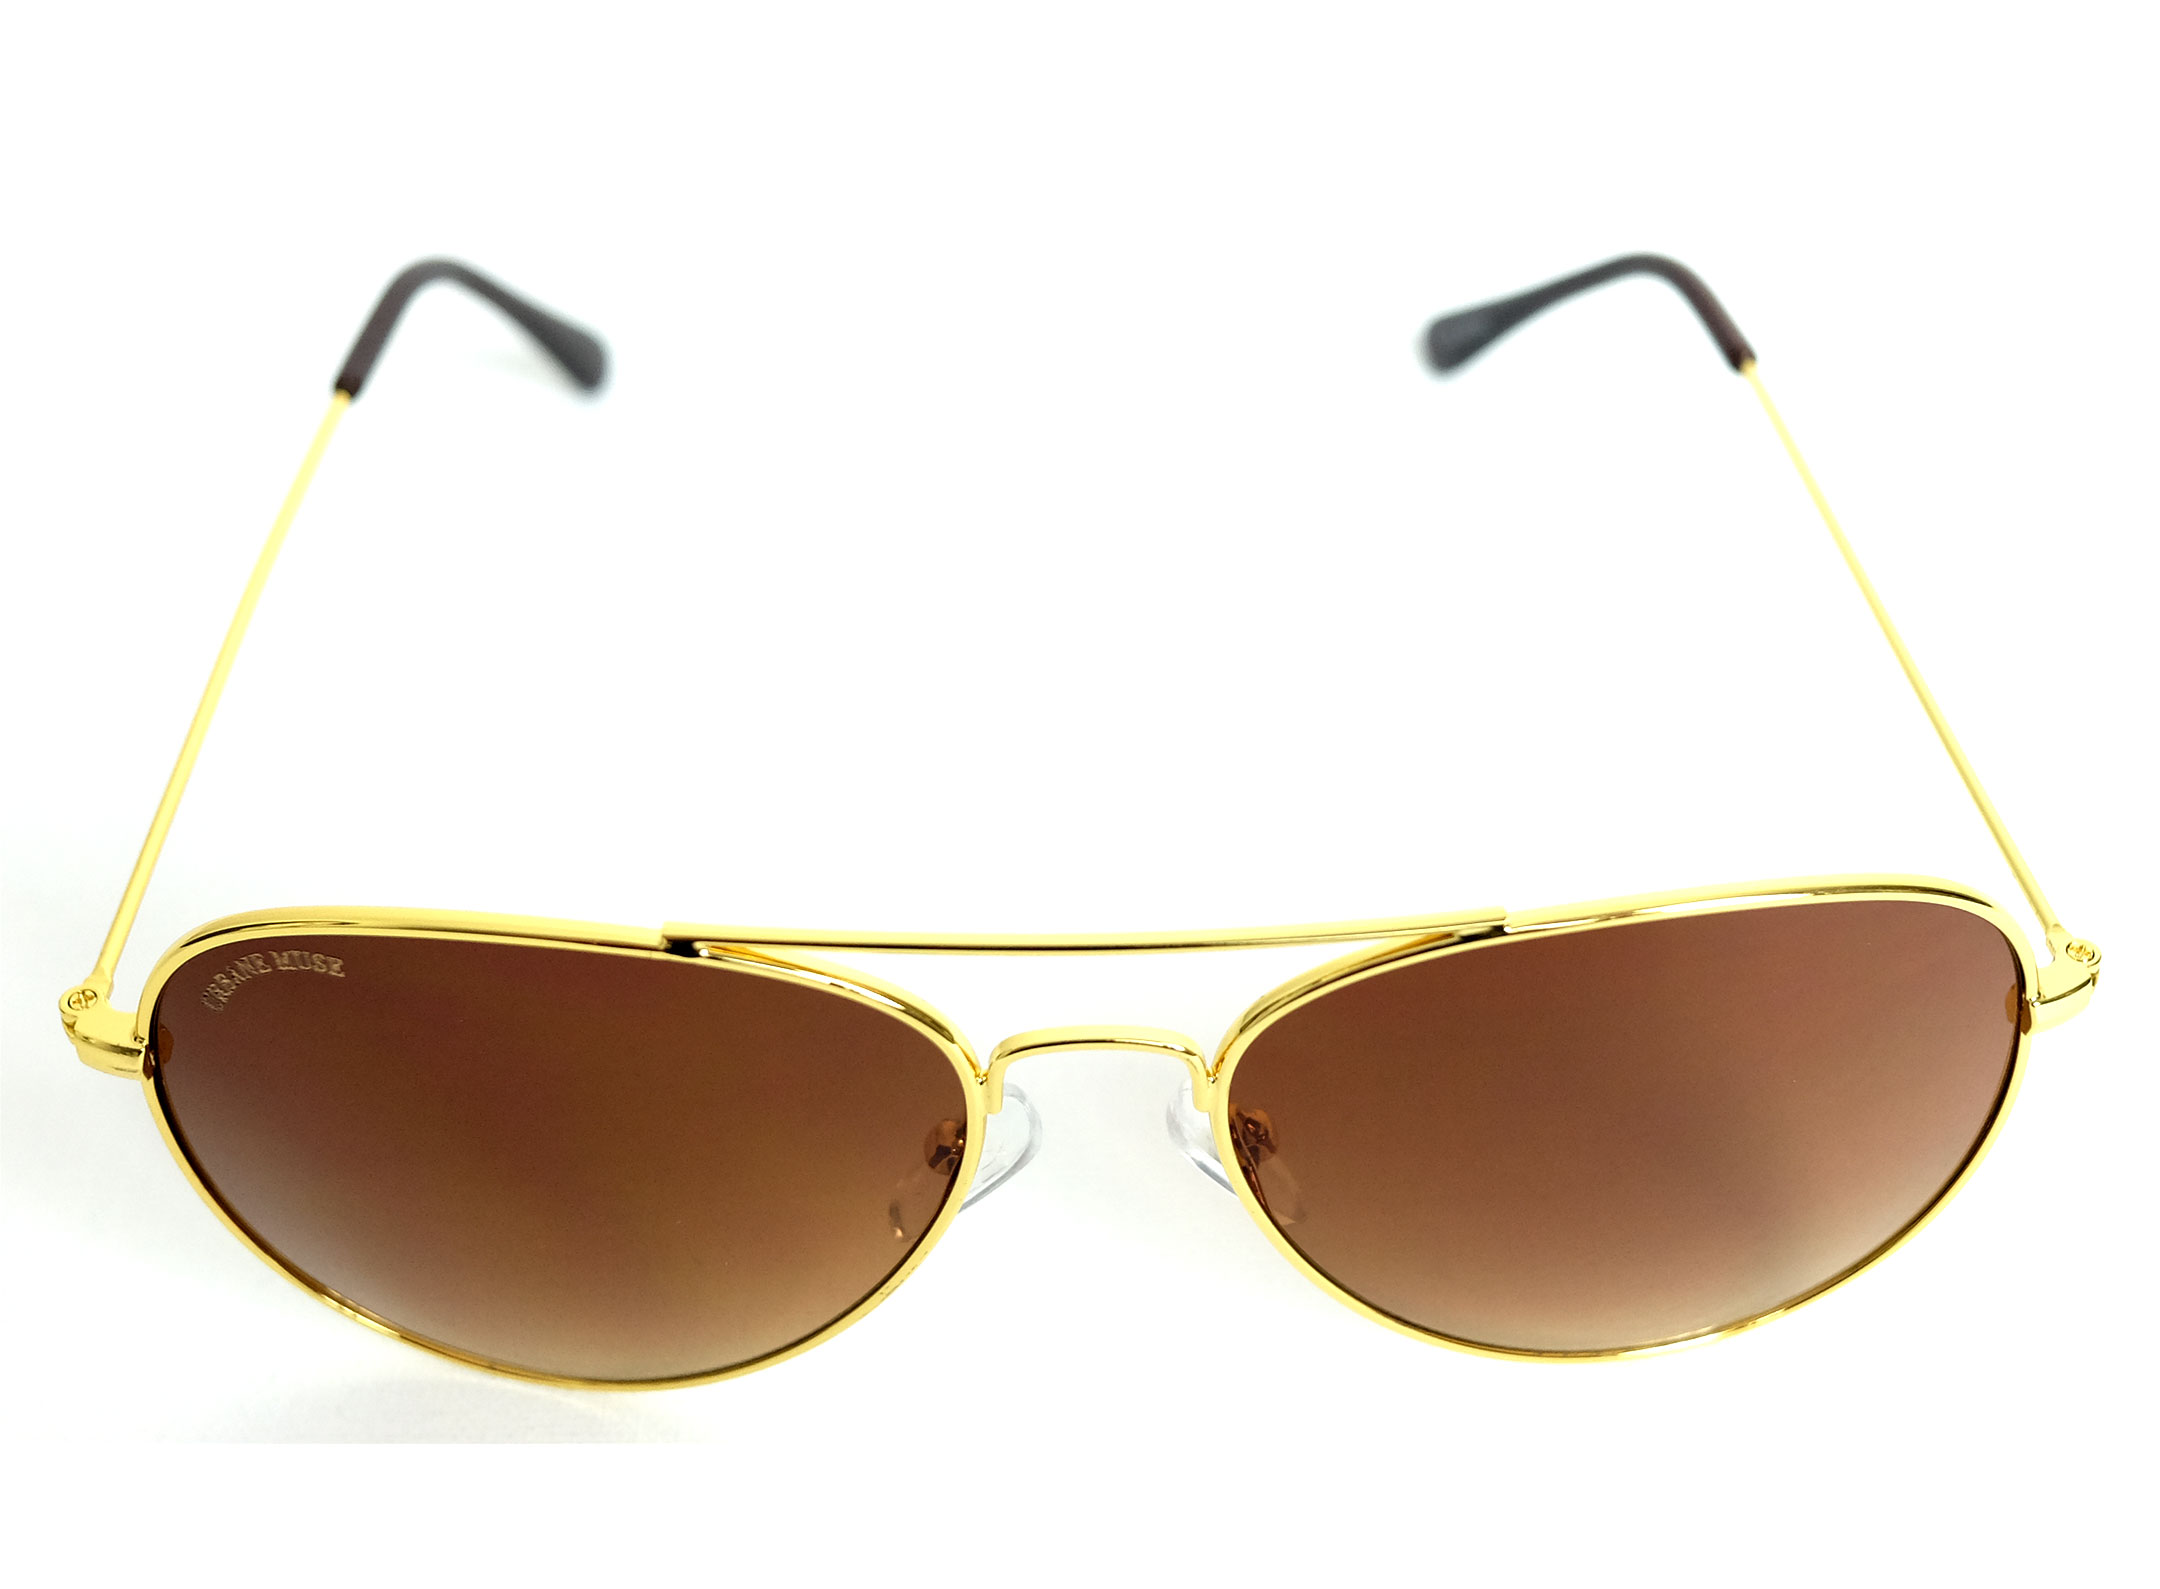 Gold MUSE SMITH® CHRIS Sunglasses Gradient Metal Frame with - URBANE Brown Aviator